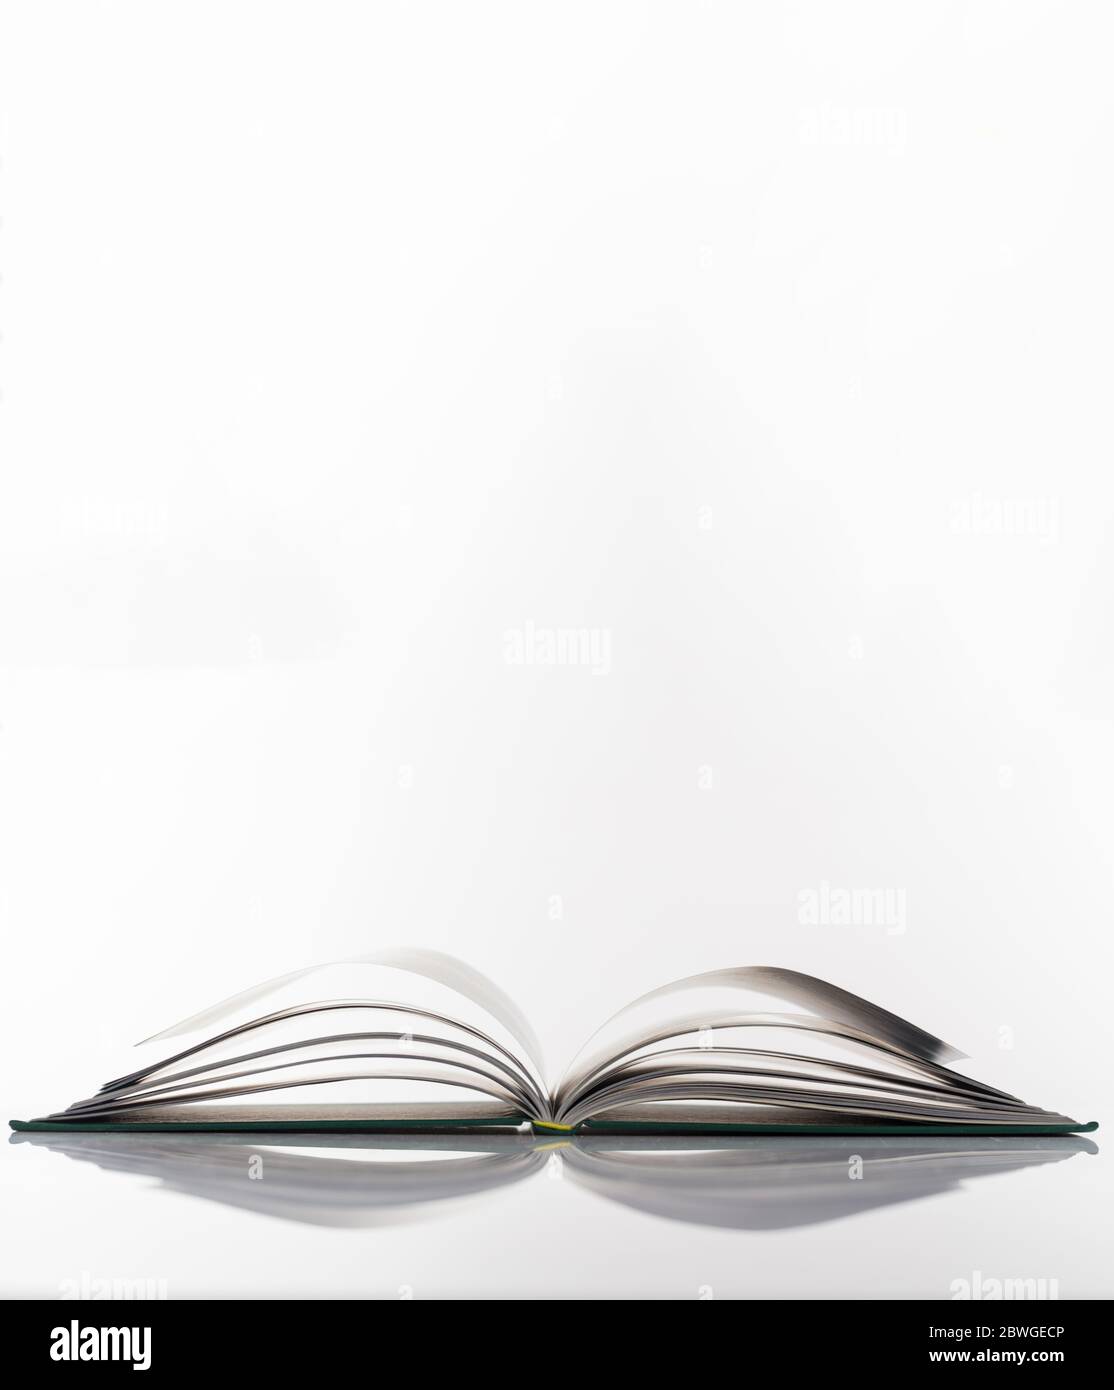 Education, knowledge, wisdom concept. Book open isolated on white background. Vertical photo, copy space. Stock Photo